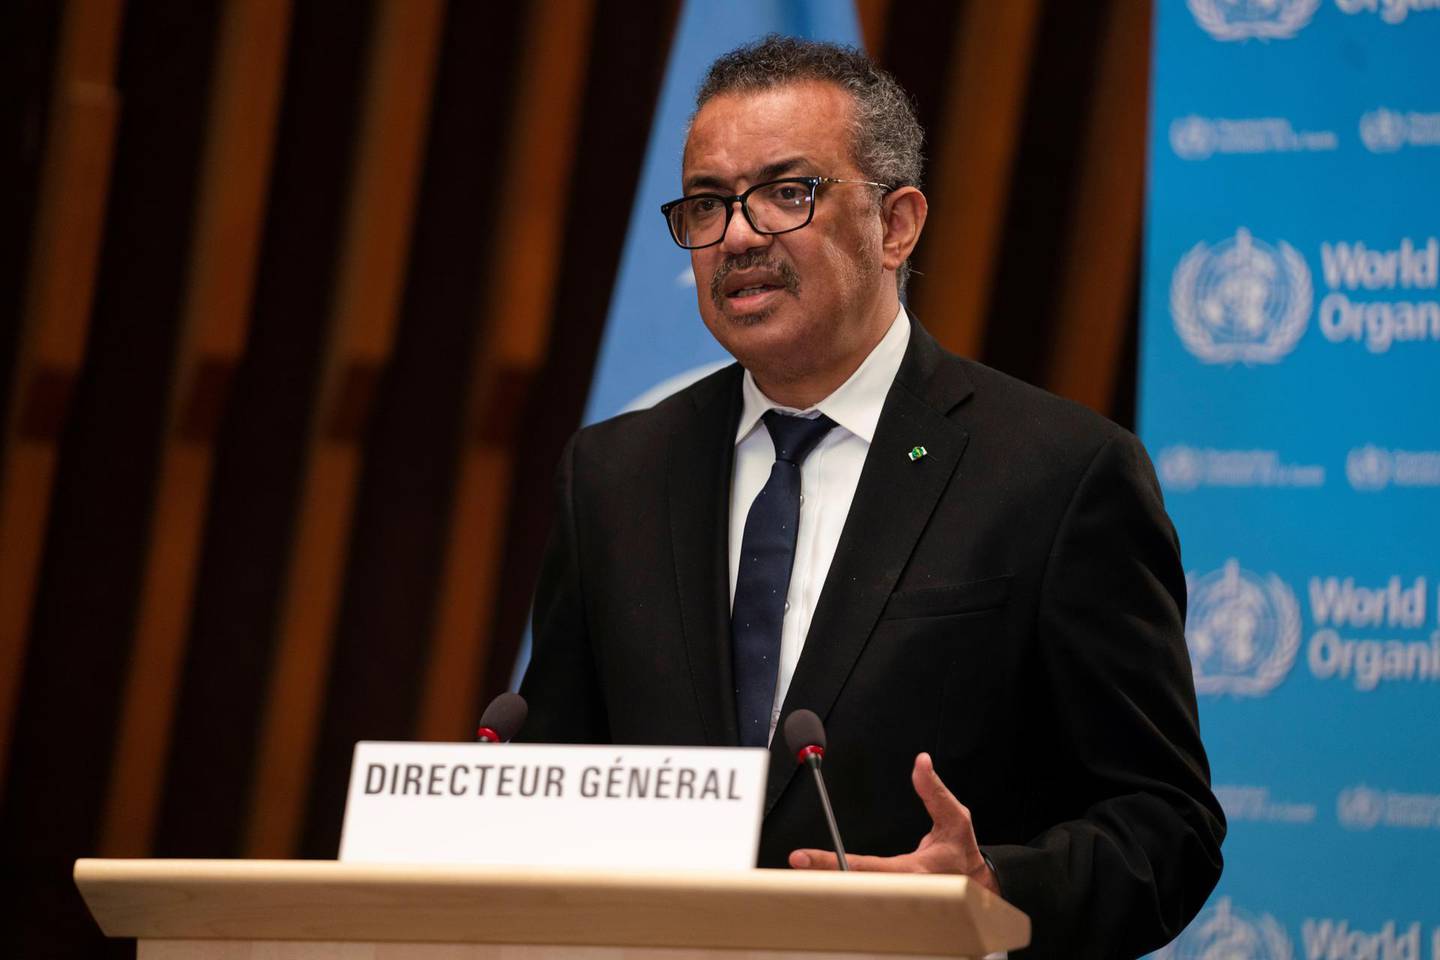 Tedros Adhanom Ghebreyesus, Director General of the World Health Organization (WHO) speaks during the opening of the 148th session of the Executive Board on the coronavirus disease (COVID-19) outbreak in Geneva, Switzerland, January 18, 2021.  Christopher Black/WHO/Handout via REUTERS THIS IMAGE HAS BEEN SUPPLIED BY A THIRD PARTY